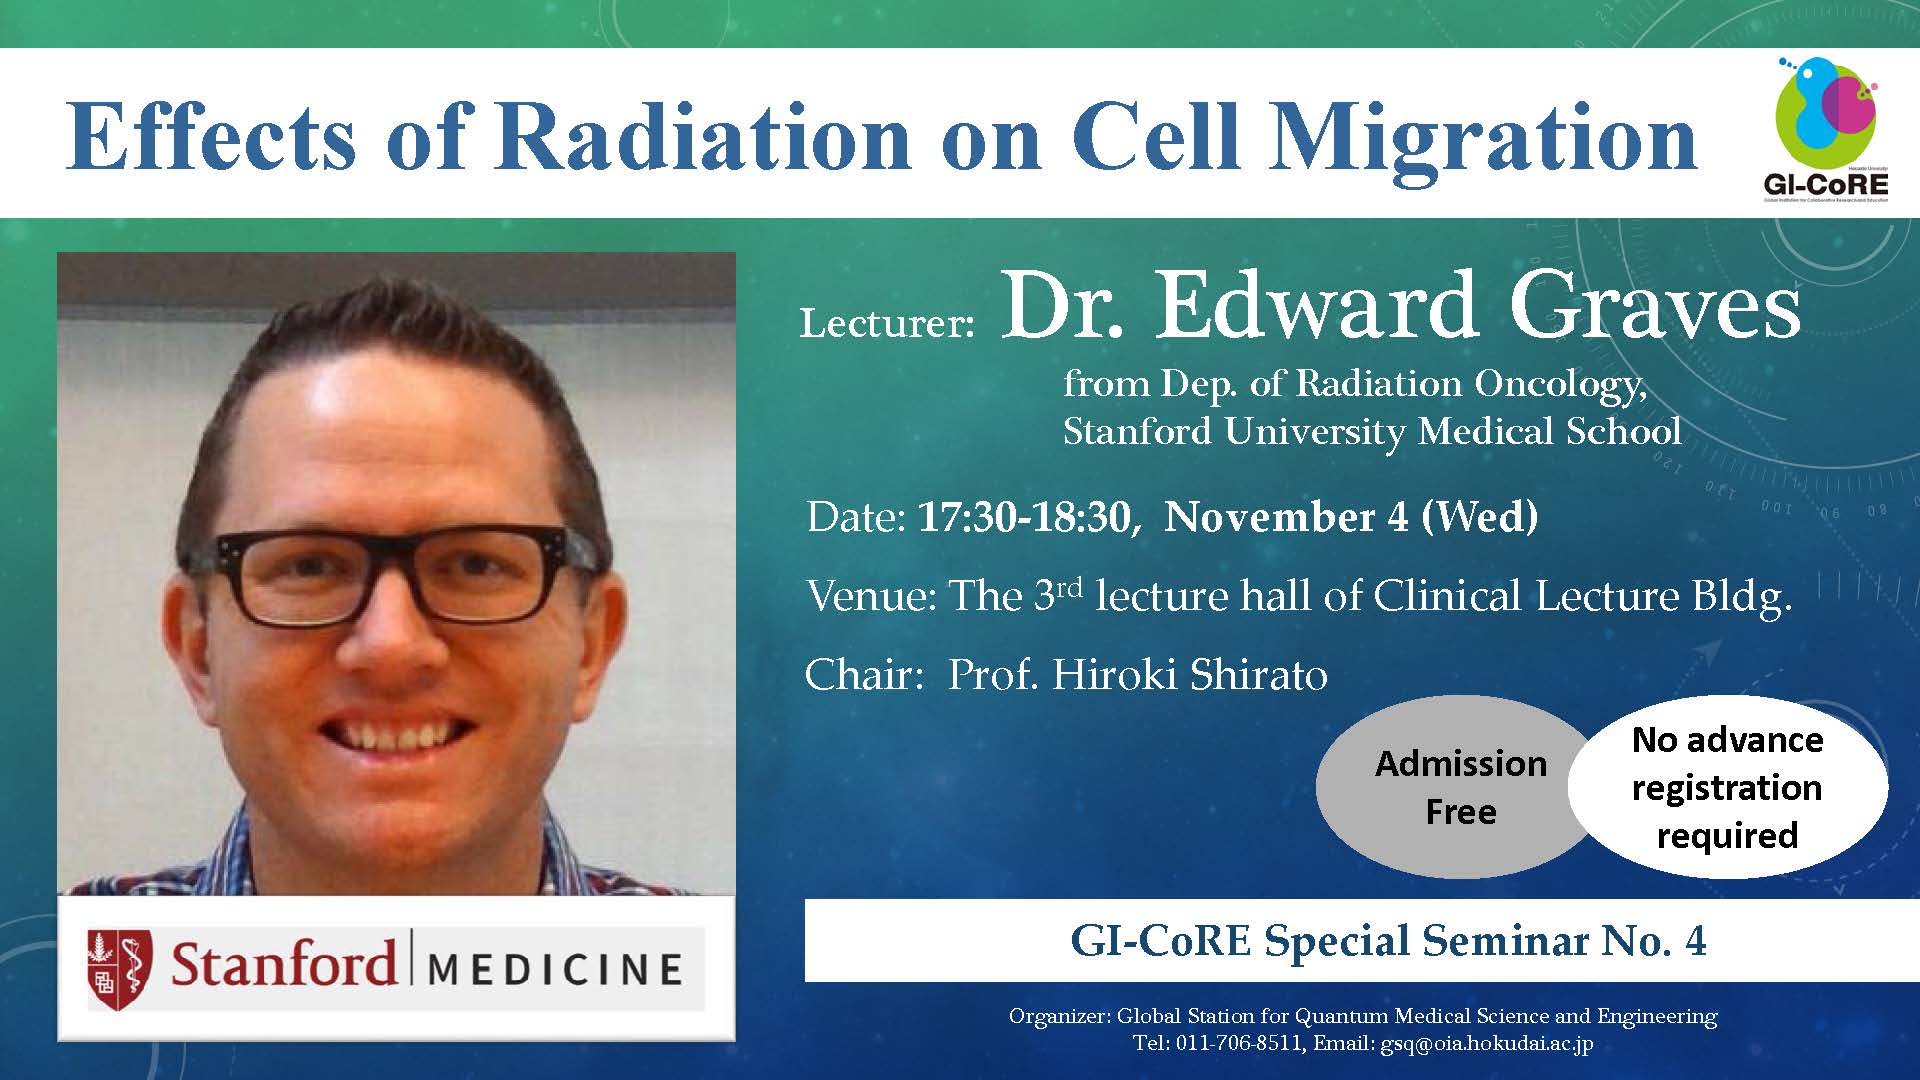 GI-CoRE special lecture by Dr. Edward Graves